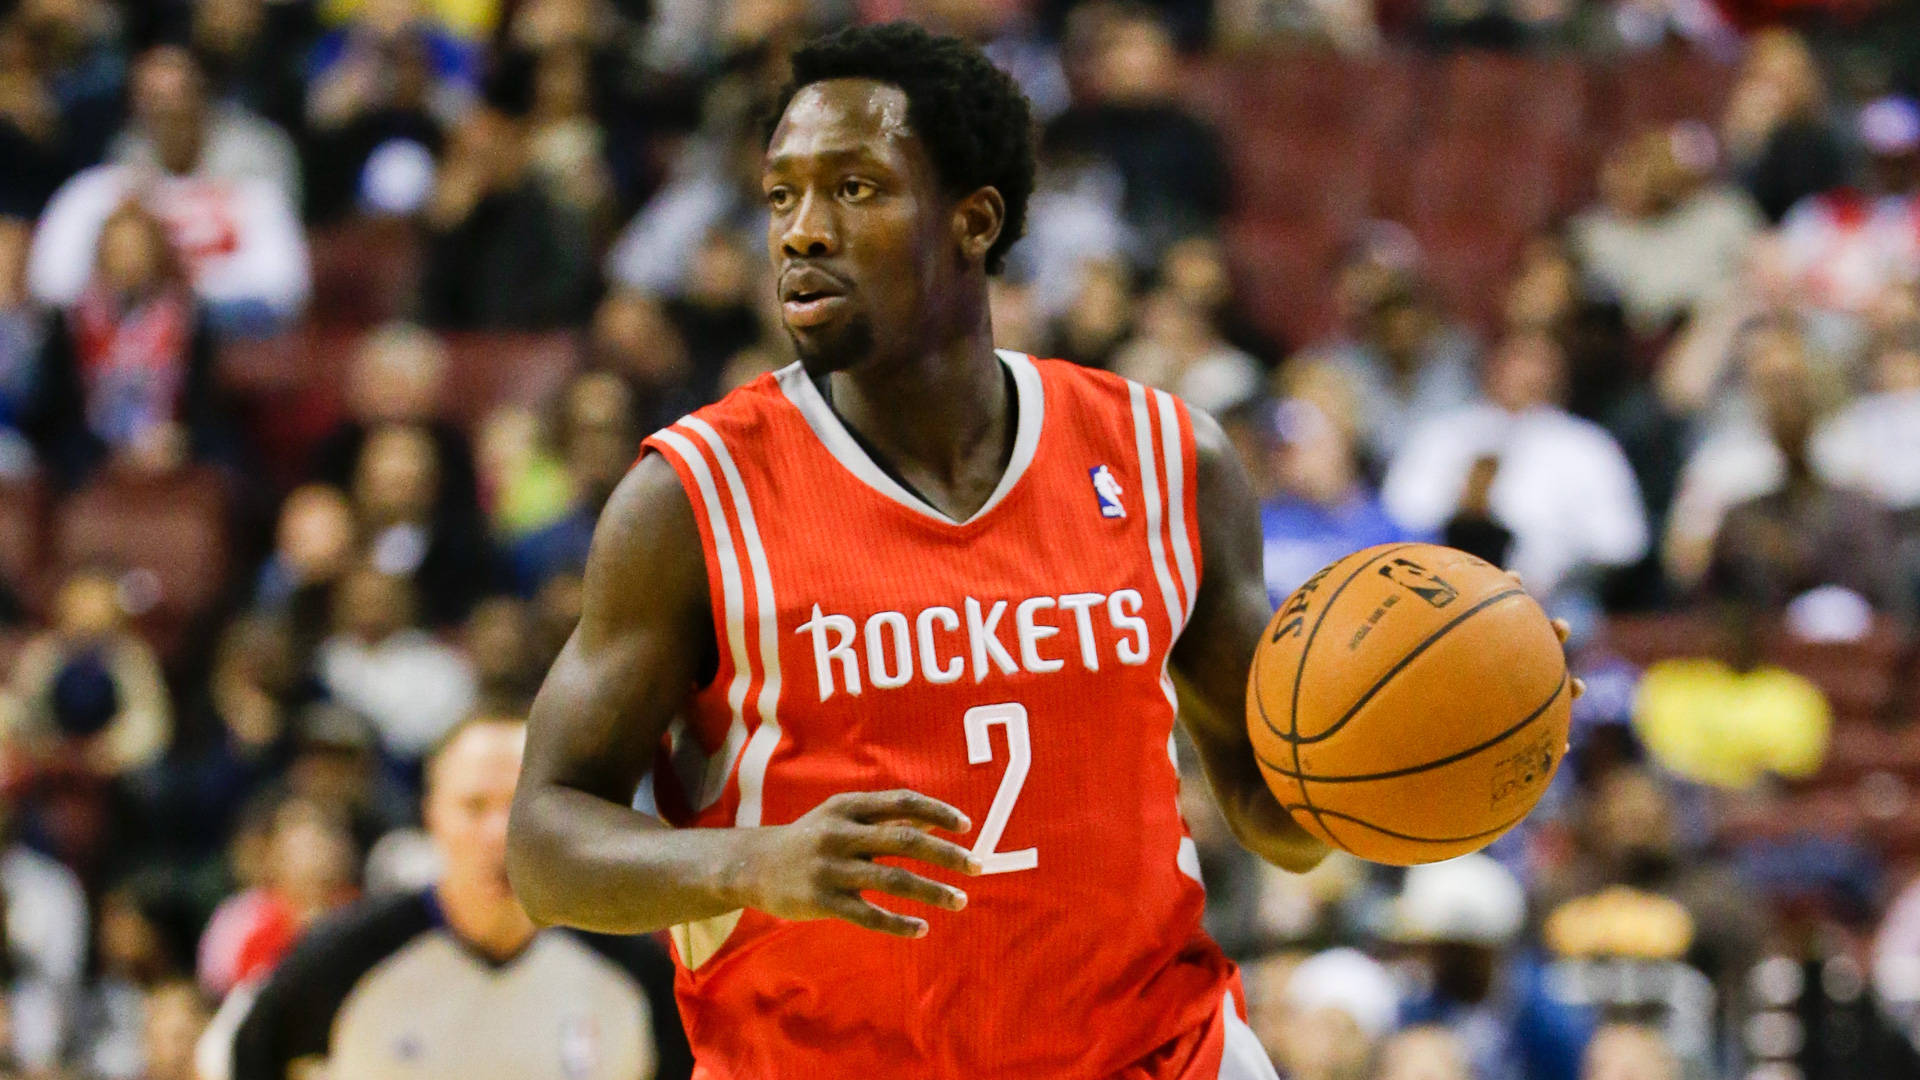 Patrick Beverly Defensive Rockets Player Background